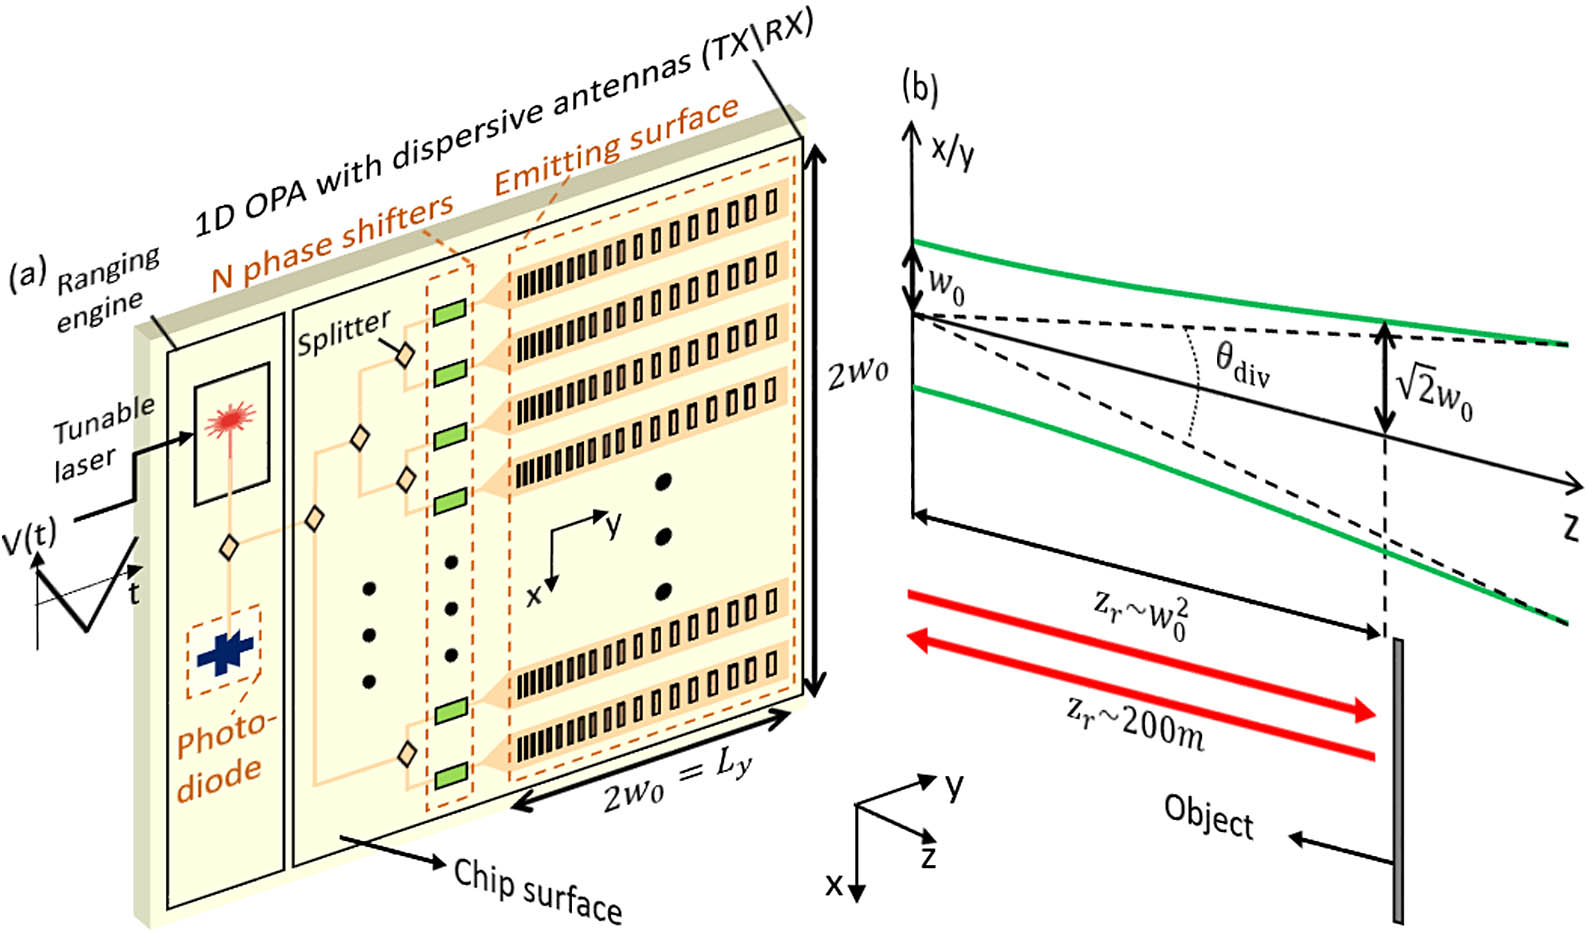 (a) Conceptual illustration of a solid-state LiDAR system integrated on a chip surface. An integrated 1D OPA with dispersive antennas is used in combination with a tunable laser to limit the number of input waveguides and phase shifters to N. A simplified ranging engine is also illustrated, where a frequency modulation approach can be implemented by using the same laser as a local oscillator and creating a beating frequency with the FM-modulated signal received back from the OPA. This approach is referred to as swept-source LiDAR [14]. The feeding network of these dispersive antennas resembles traditional Butler [15] or Nolen [16] networks from microwave systems. The feeding network can be constructed with a feed-forward Mach–Zehnder mesh circuit [17,18]. (b) To have a large enough Rayleigh range, the near-field beam diameter 2w0 should be large enough, both in the x and y directions (illustrated with the “x/y” label on the vertical axis). In other words, the field divergence θdiv should be small enough for an adequate resolution [δθx and δθy, see Fig. 3(a)].